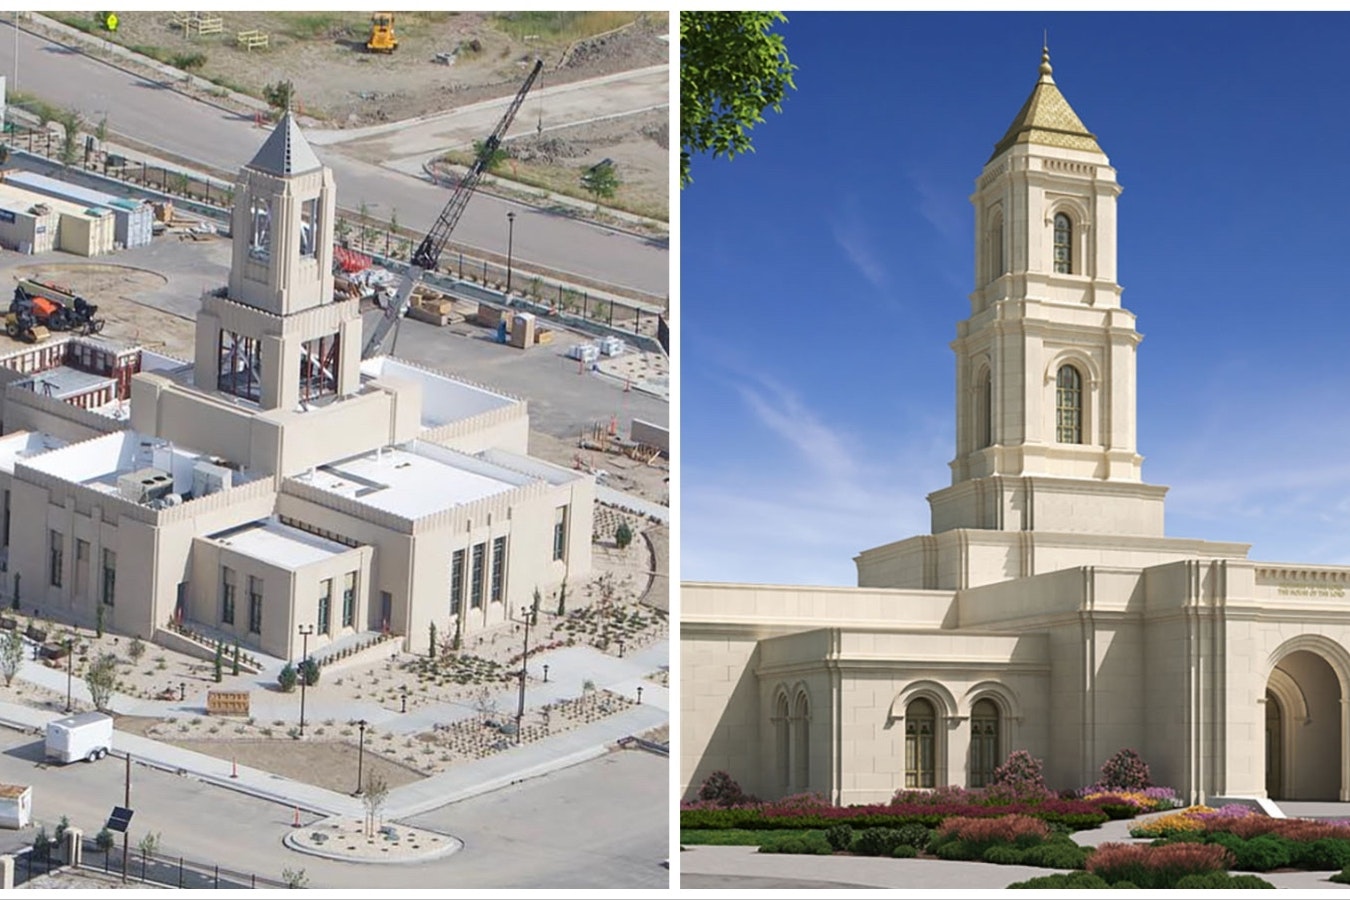 The Casper Church of Jesus Christ of Latter-day Saints temple left, is nearing completion wile the proposed Cody Wyoming Temple, right, has had months of controversy and opposition.